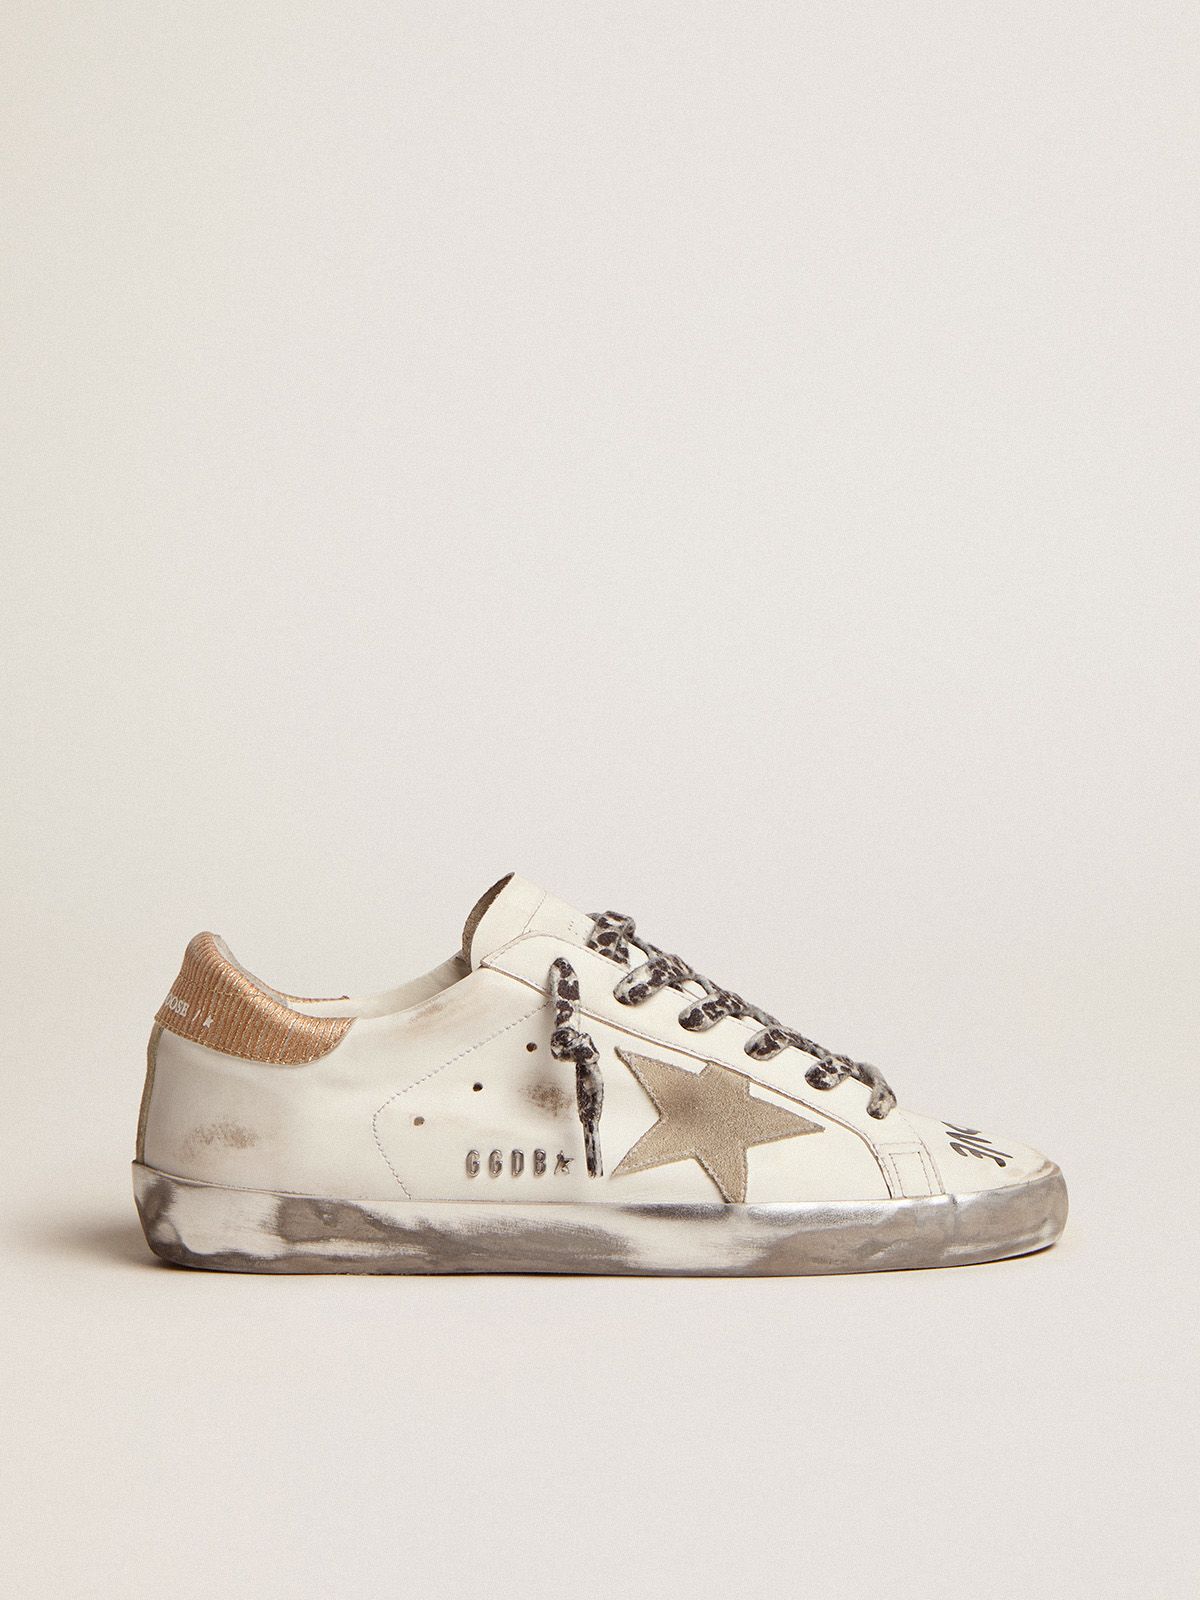 golden goose with white and lettering black suede star sneakers contrasting leather ice-gray Super-Star in